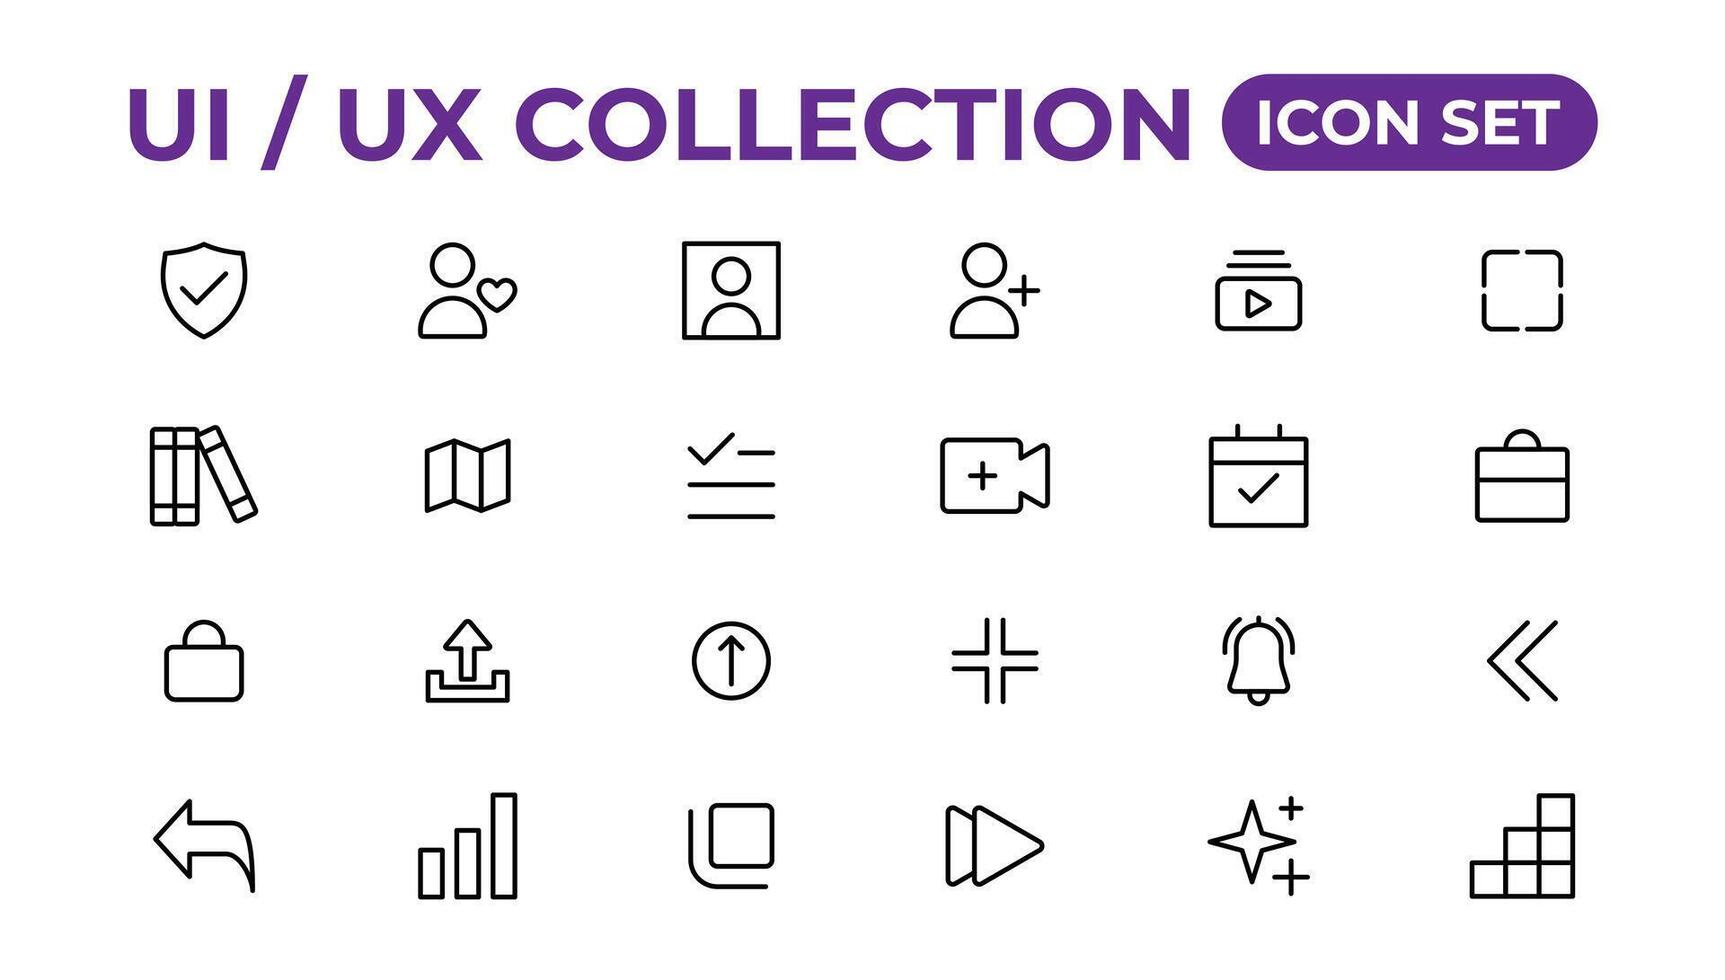 Ui ux icon set, user interface iconset collection. vector